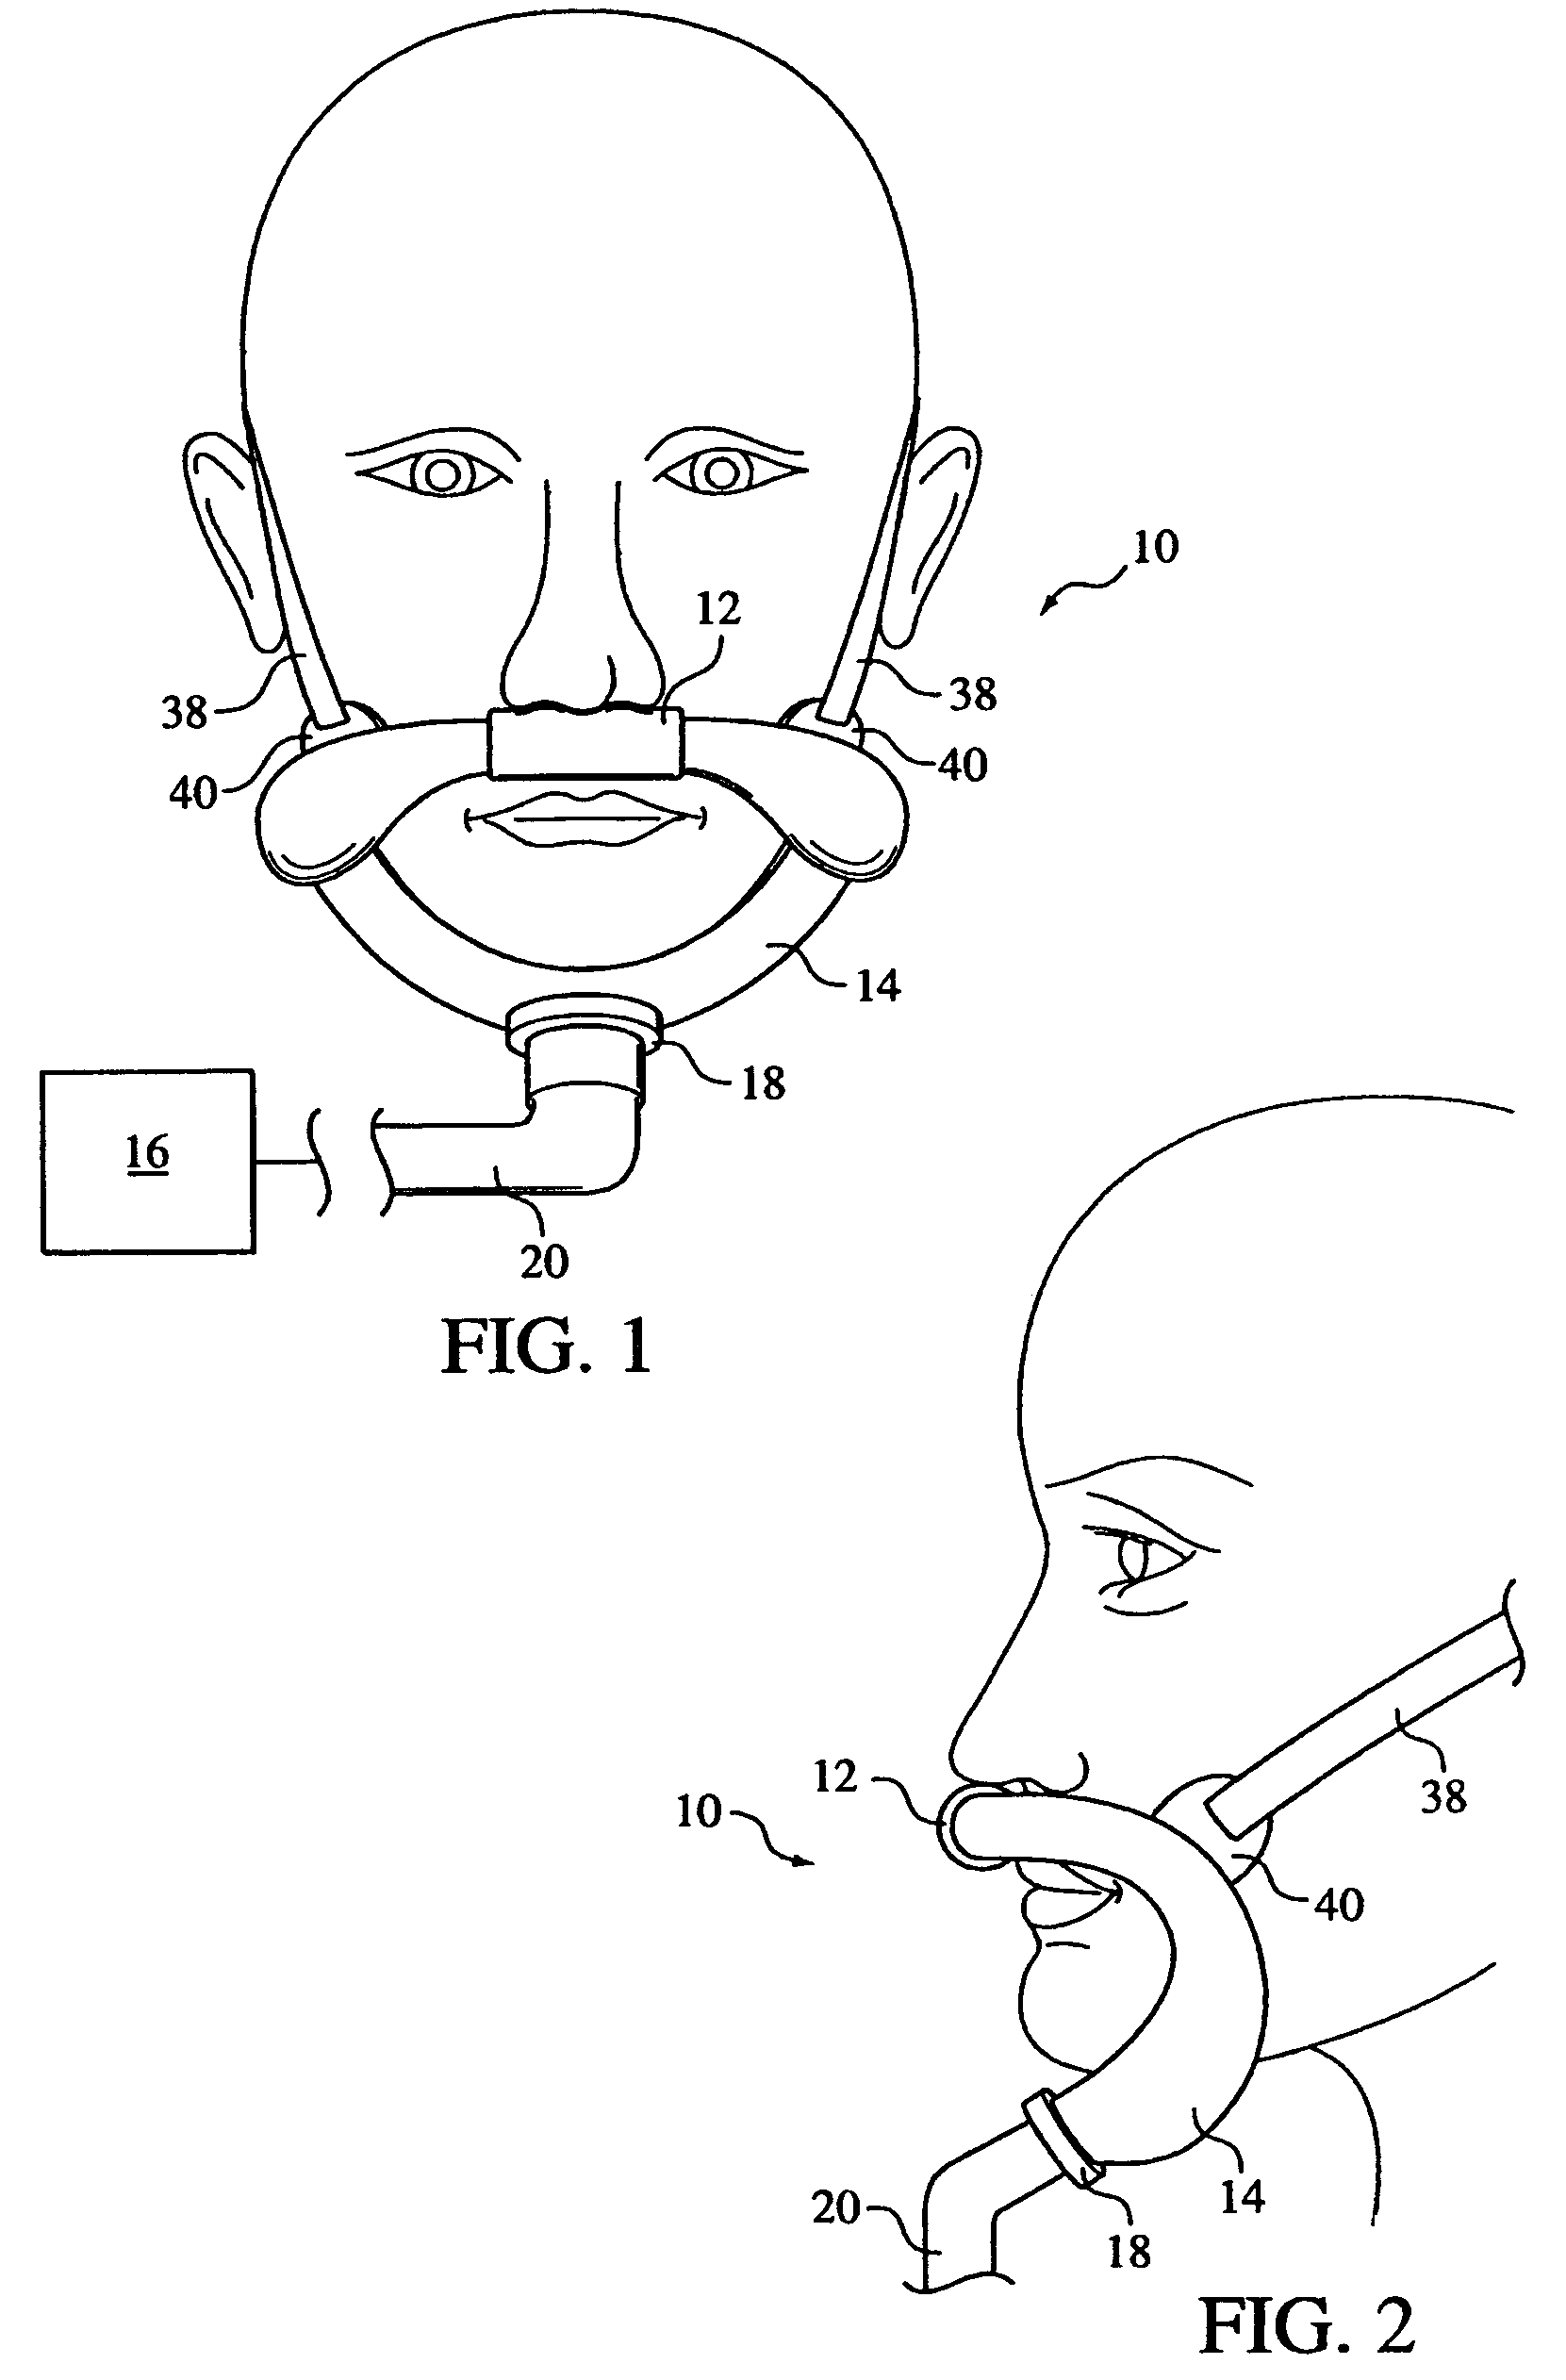 Patient interface assembly supported under the mandible